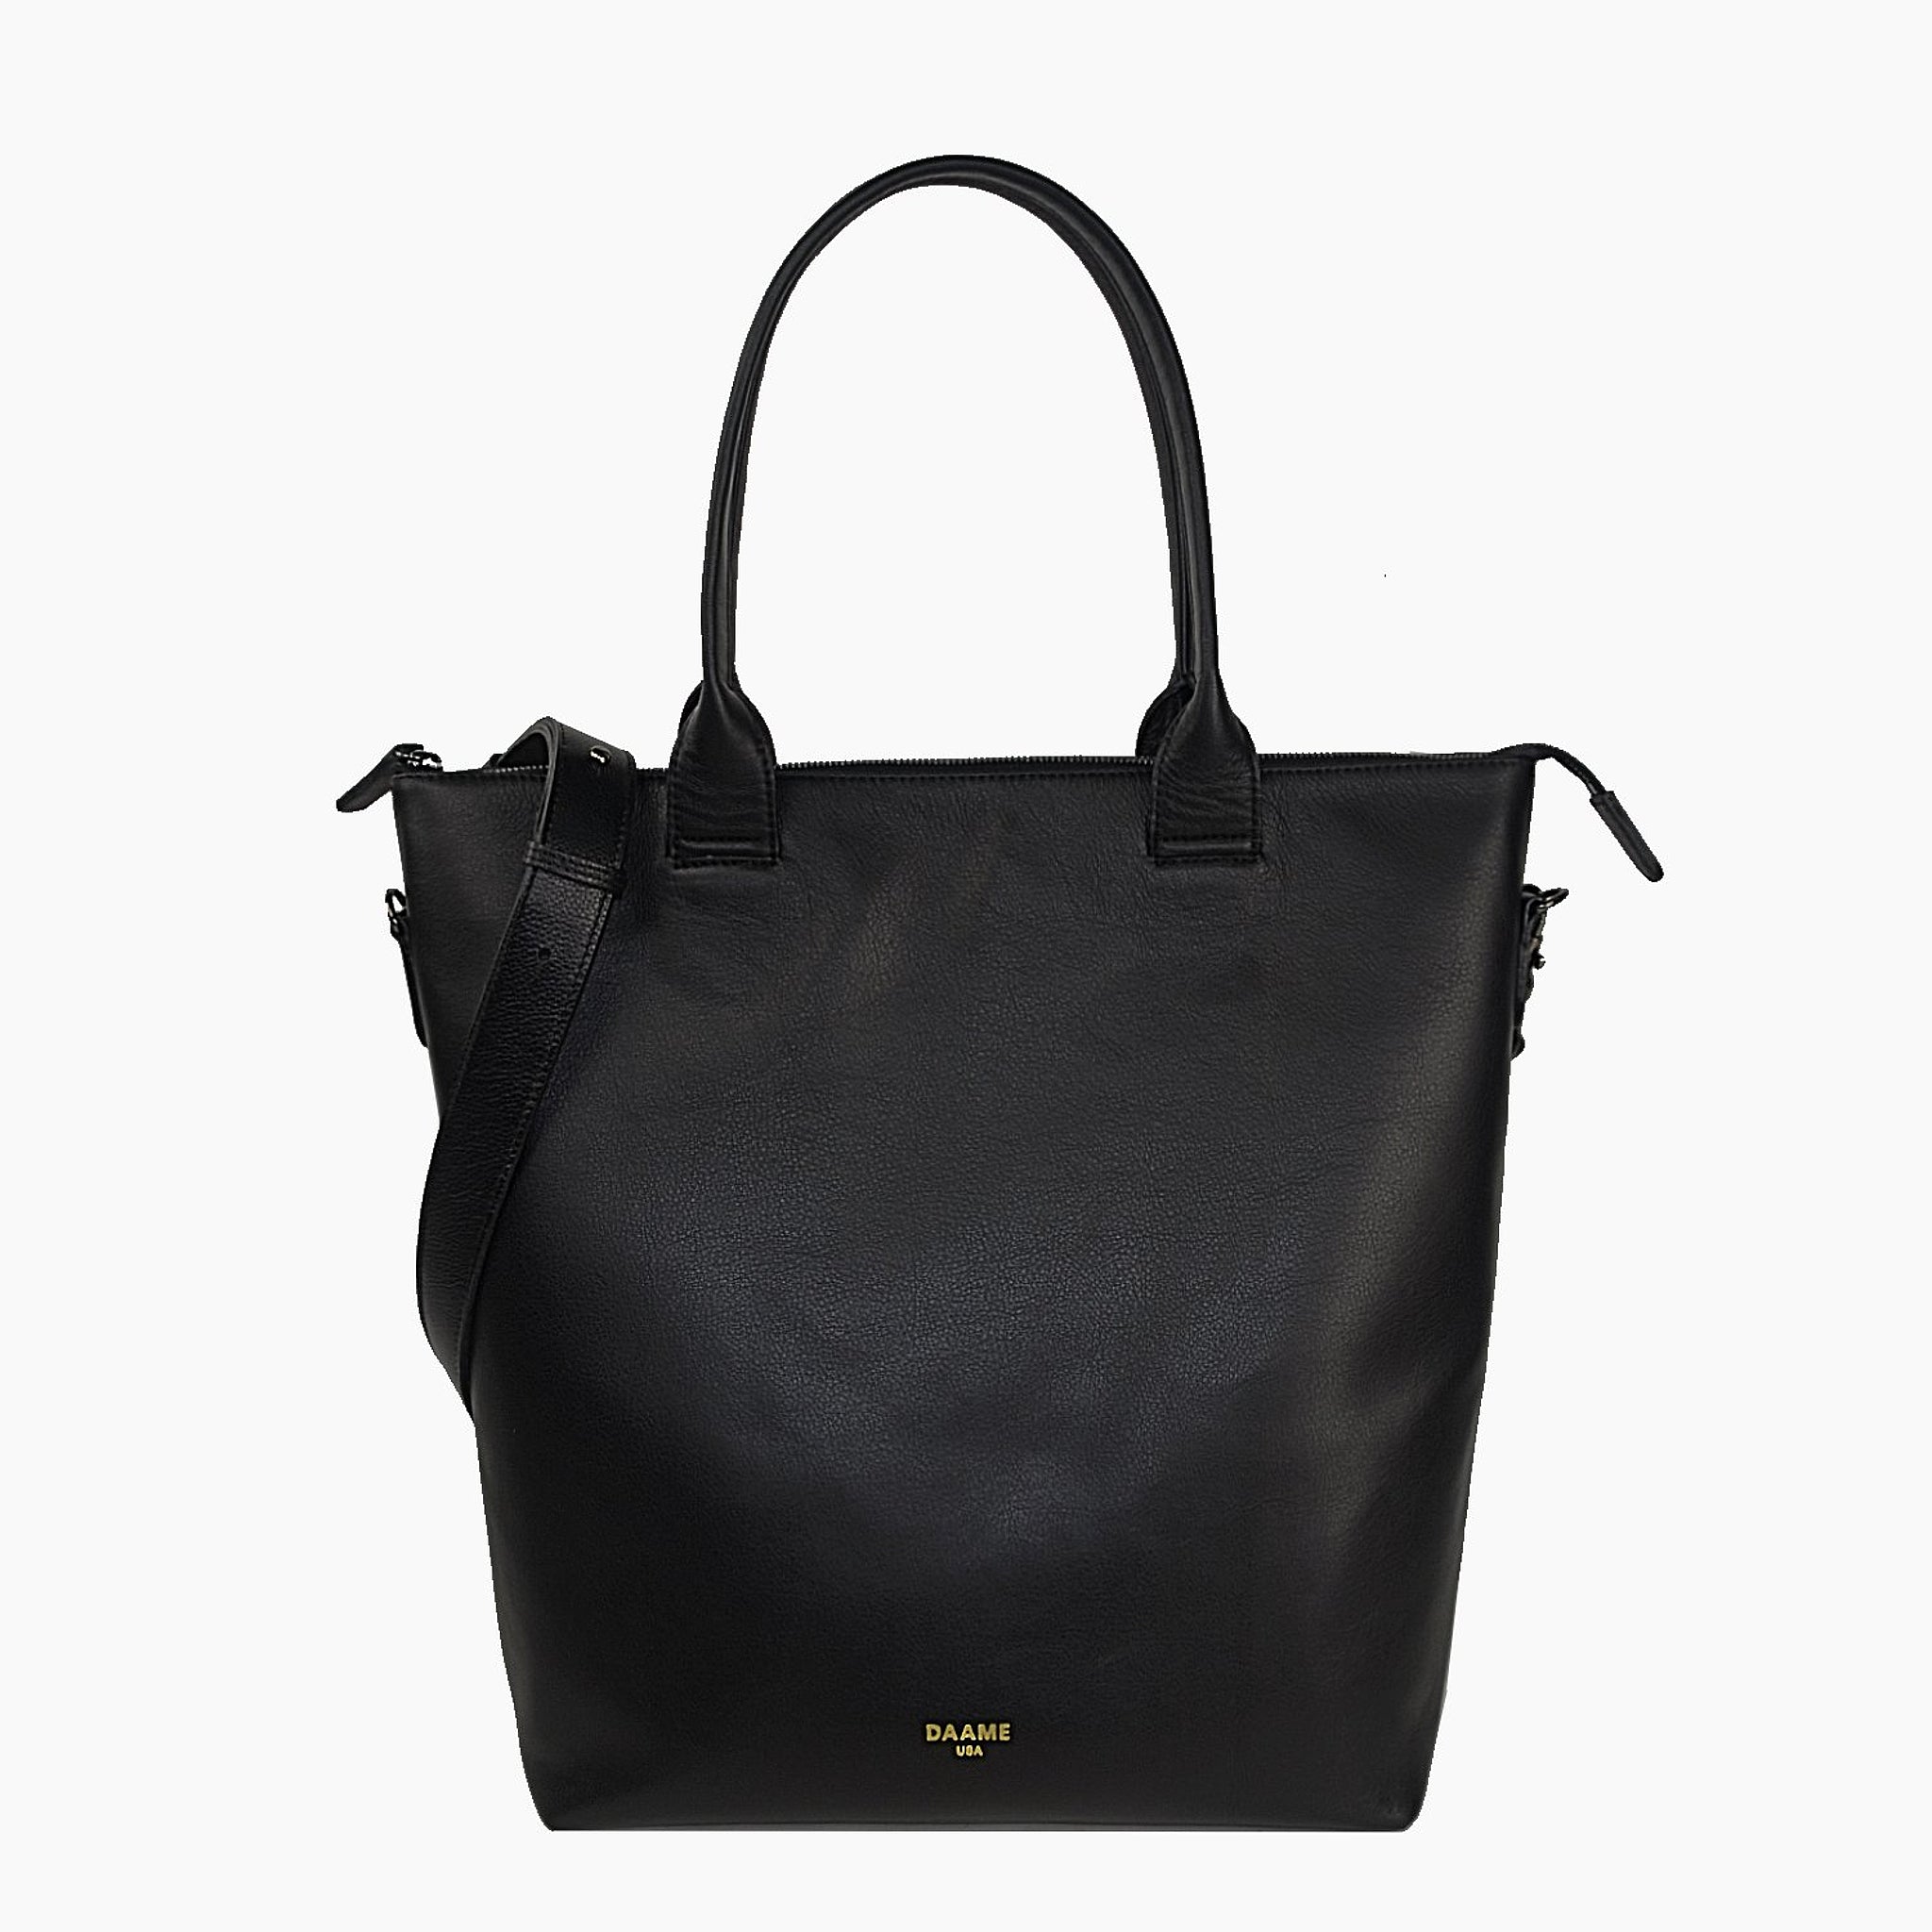 Everest tote